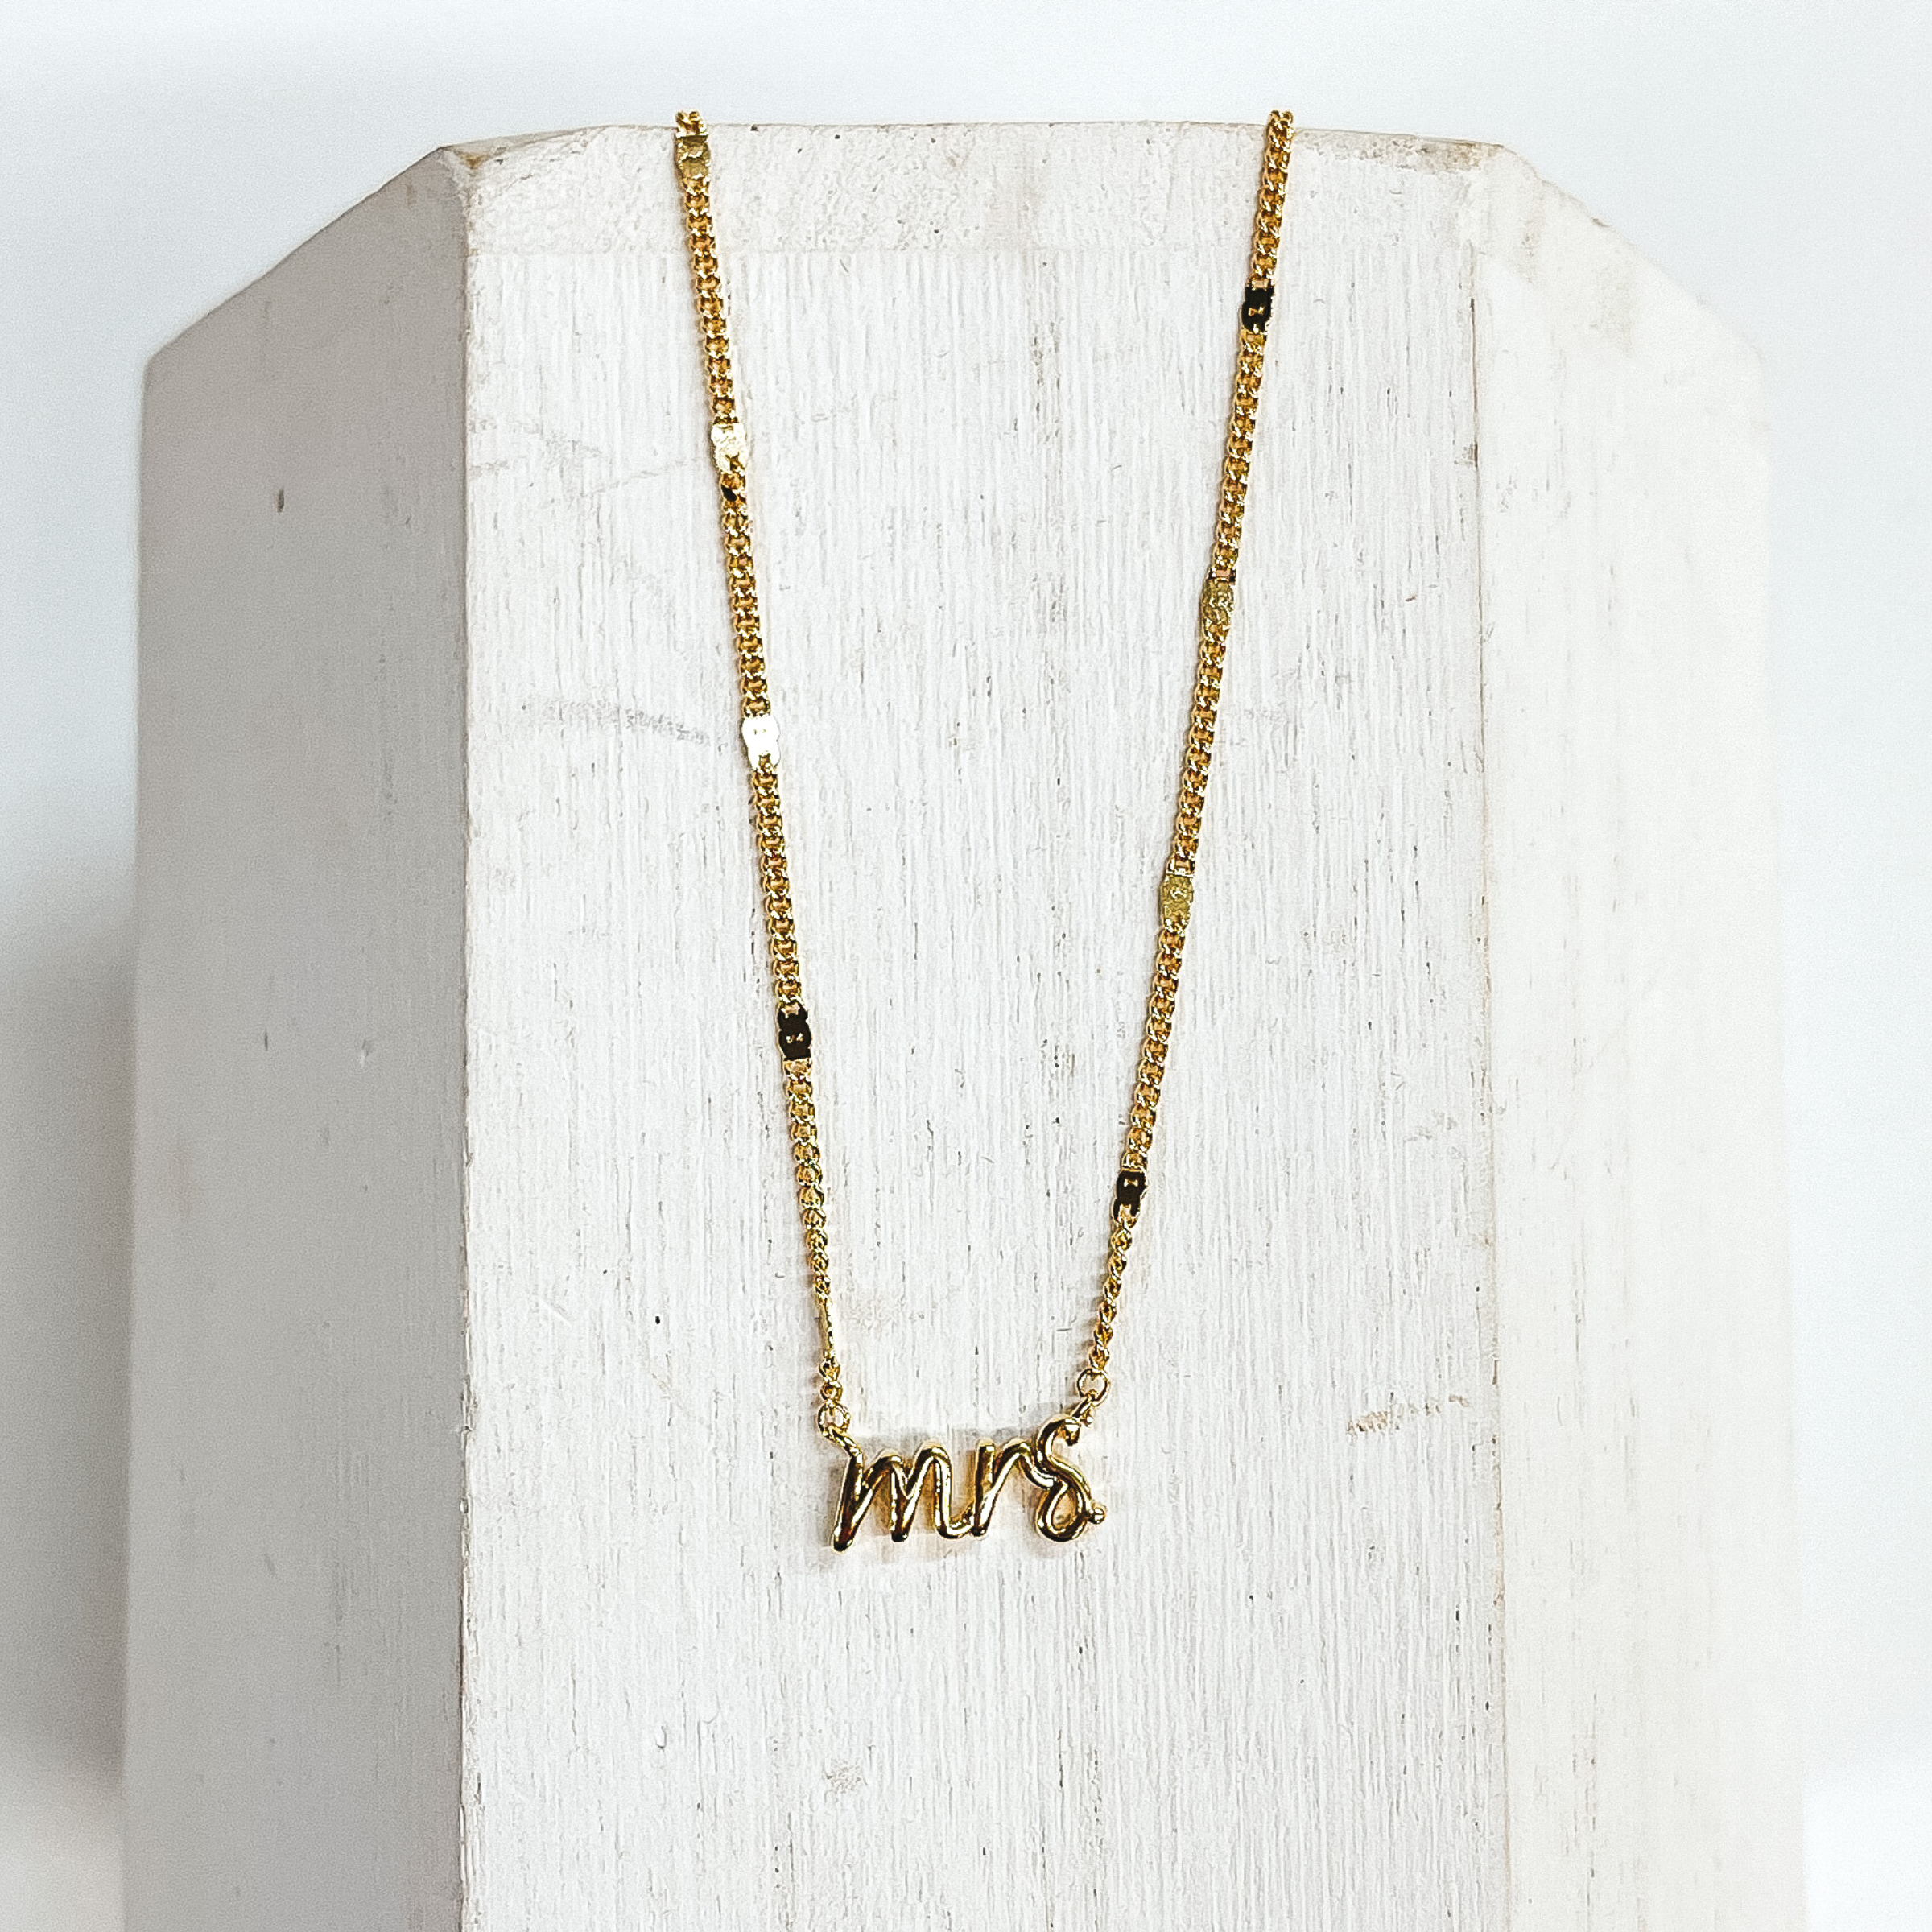 Gold Chain Necklace with Mrs. Pendant - Giddy Up Glamour Boutique